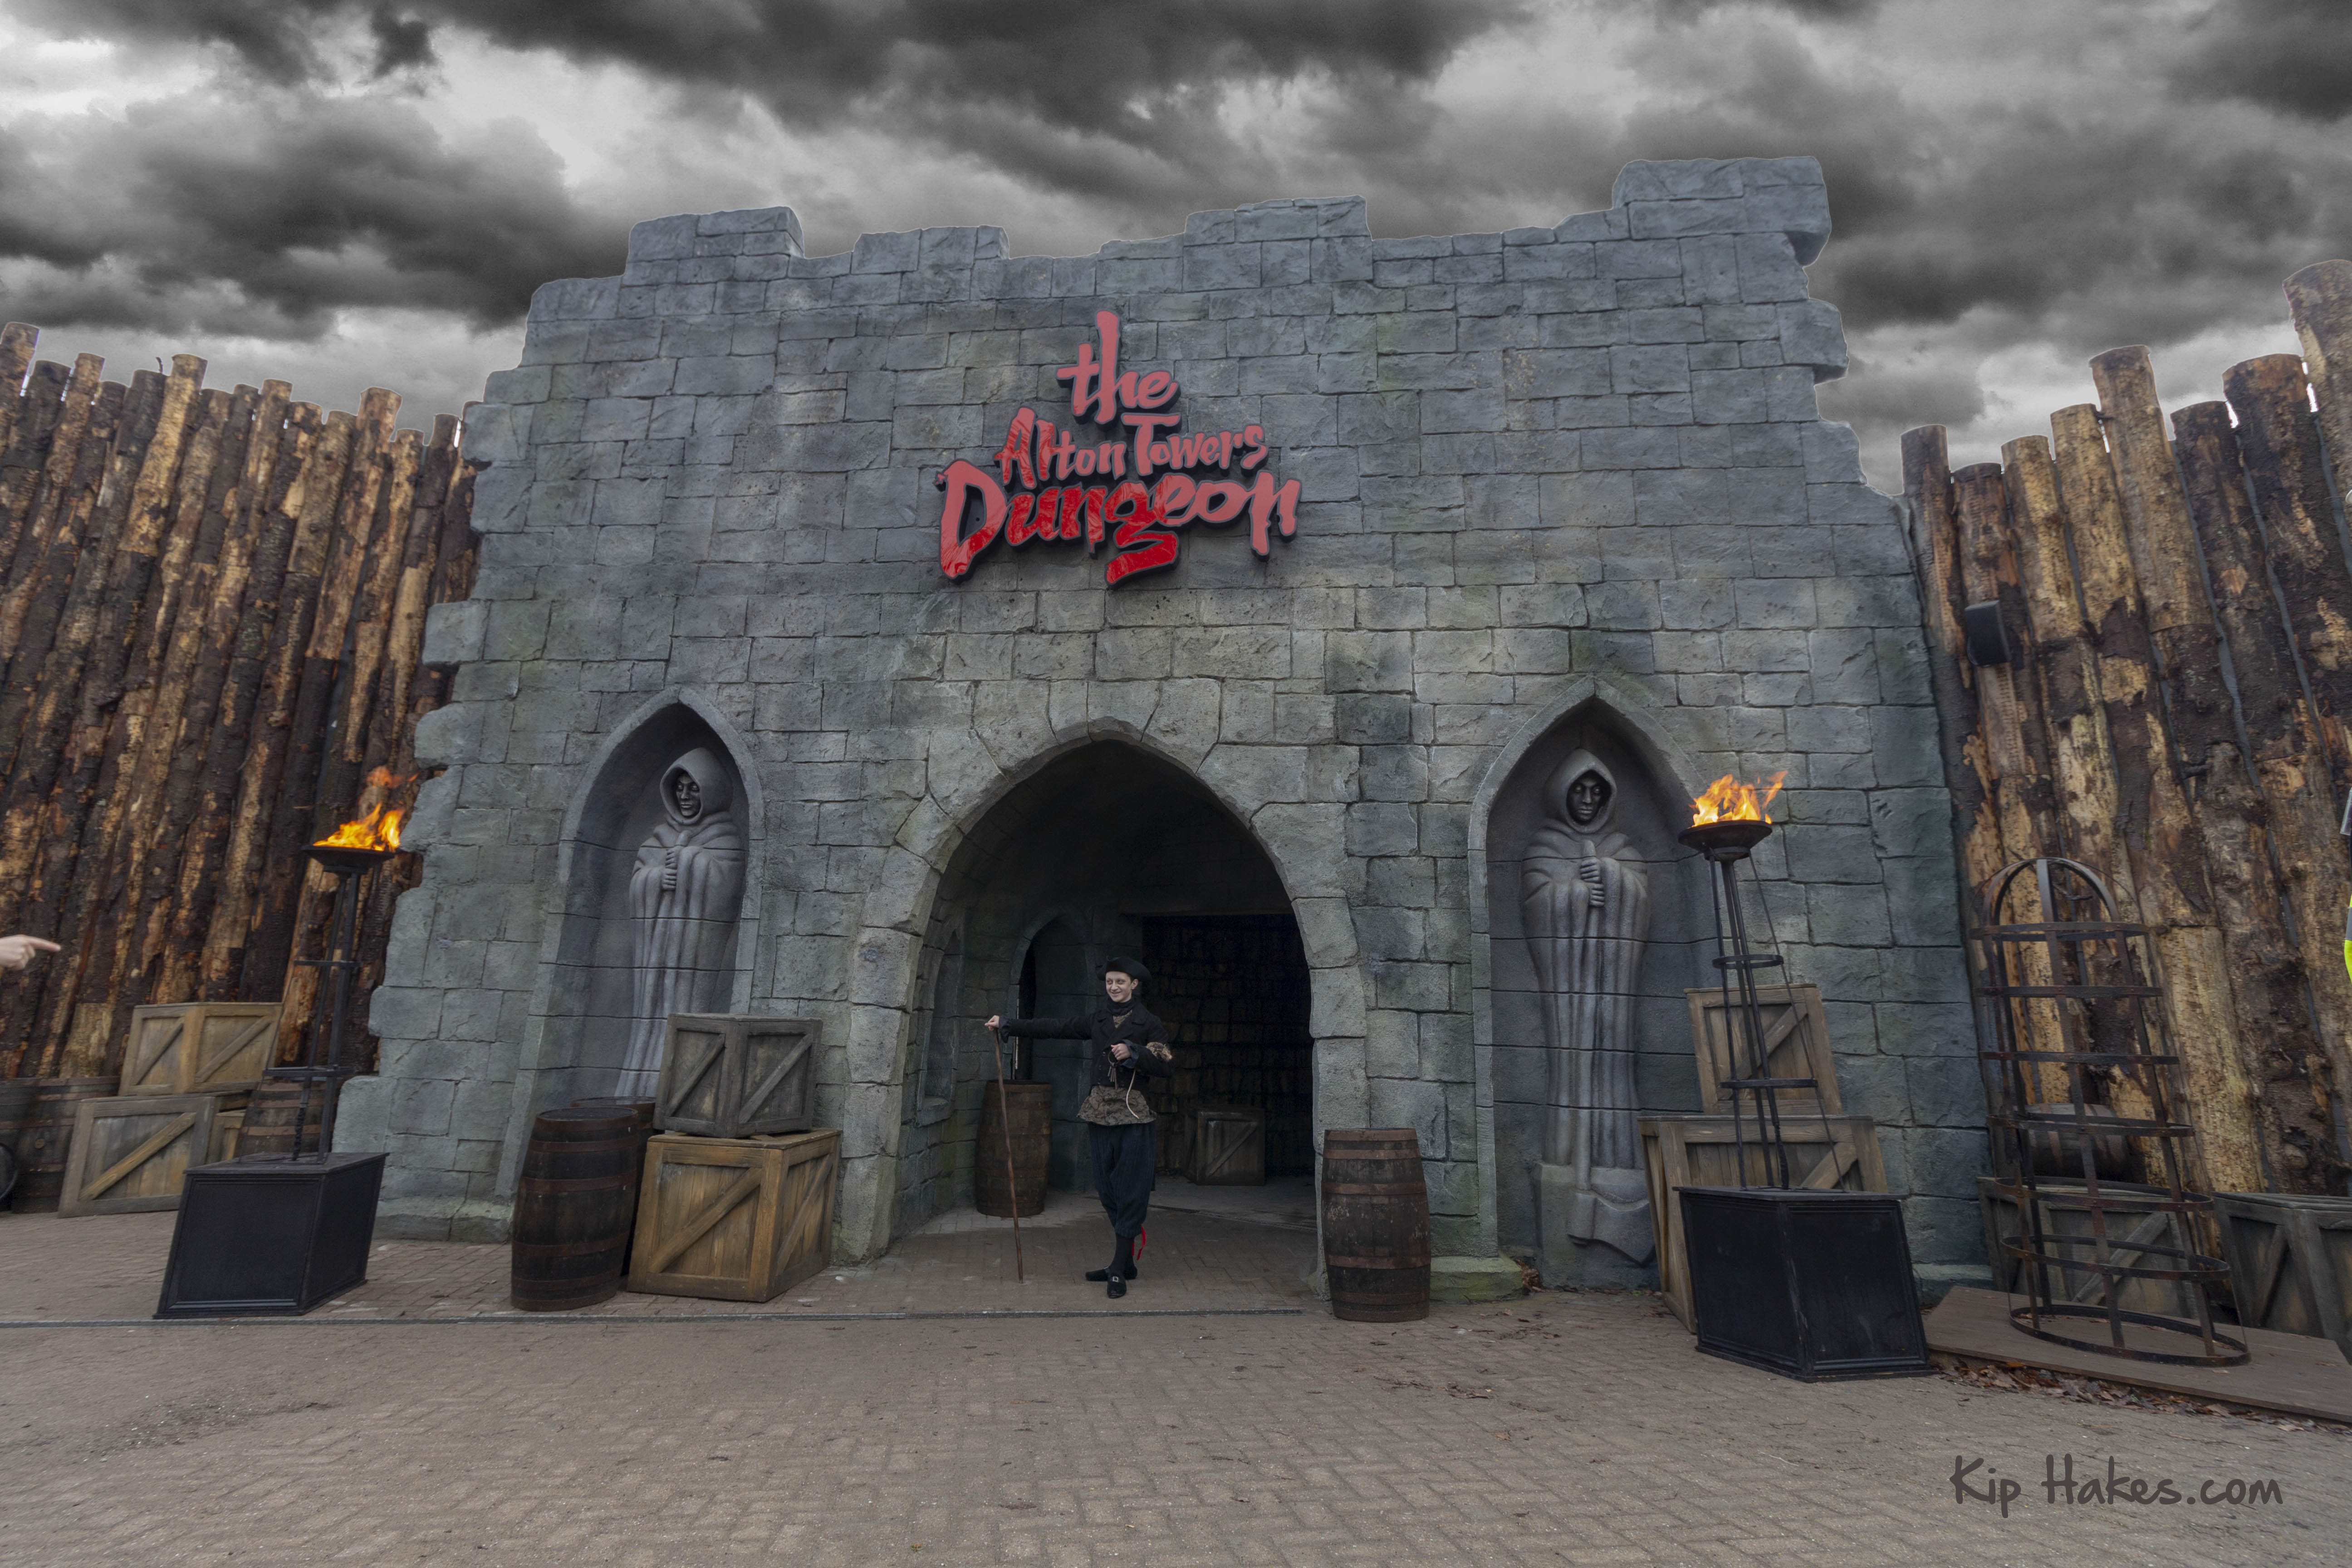 The menacing exterior of the Alton Towers Dungeon